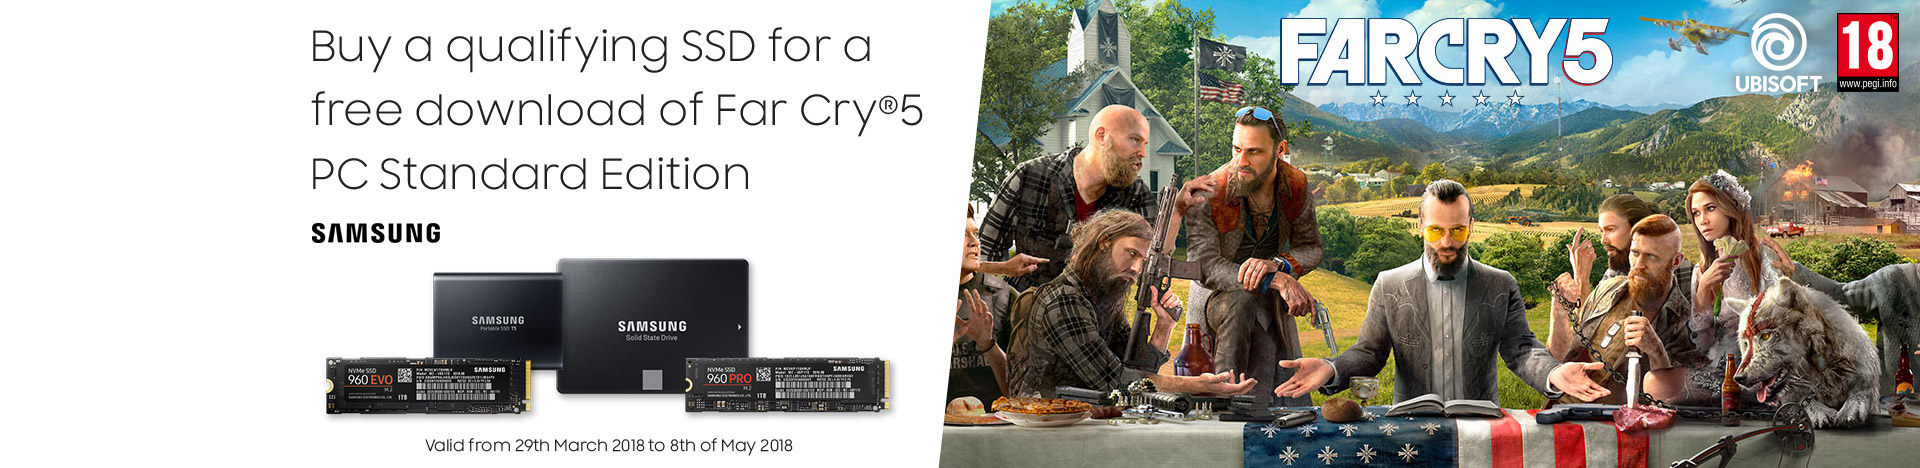 Buy a qualifying SSD for a free download of Far Cry 5 PC Standard Edition